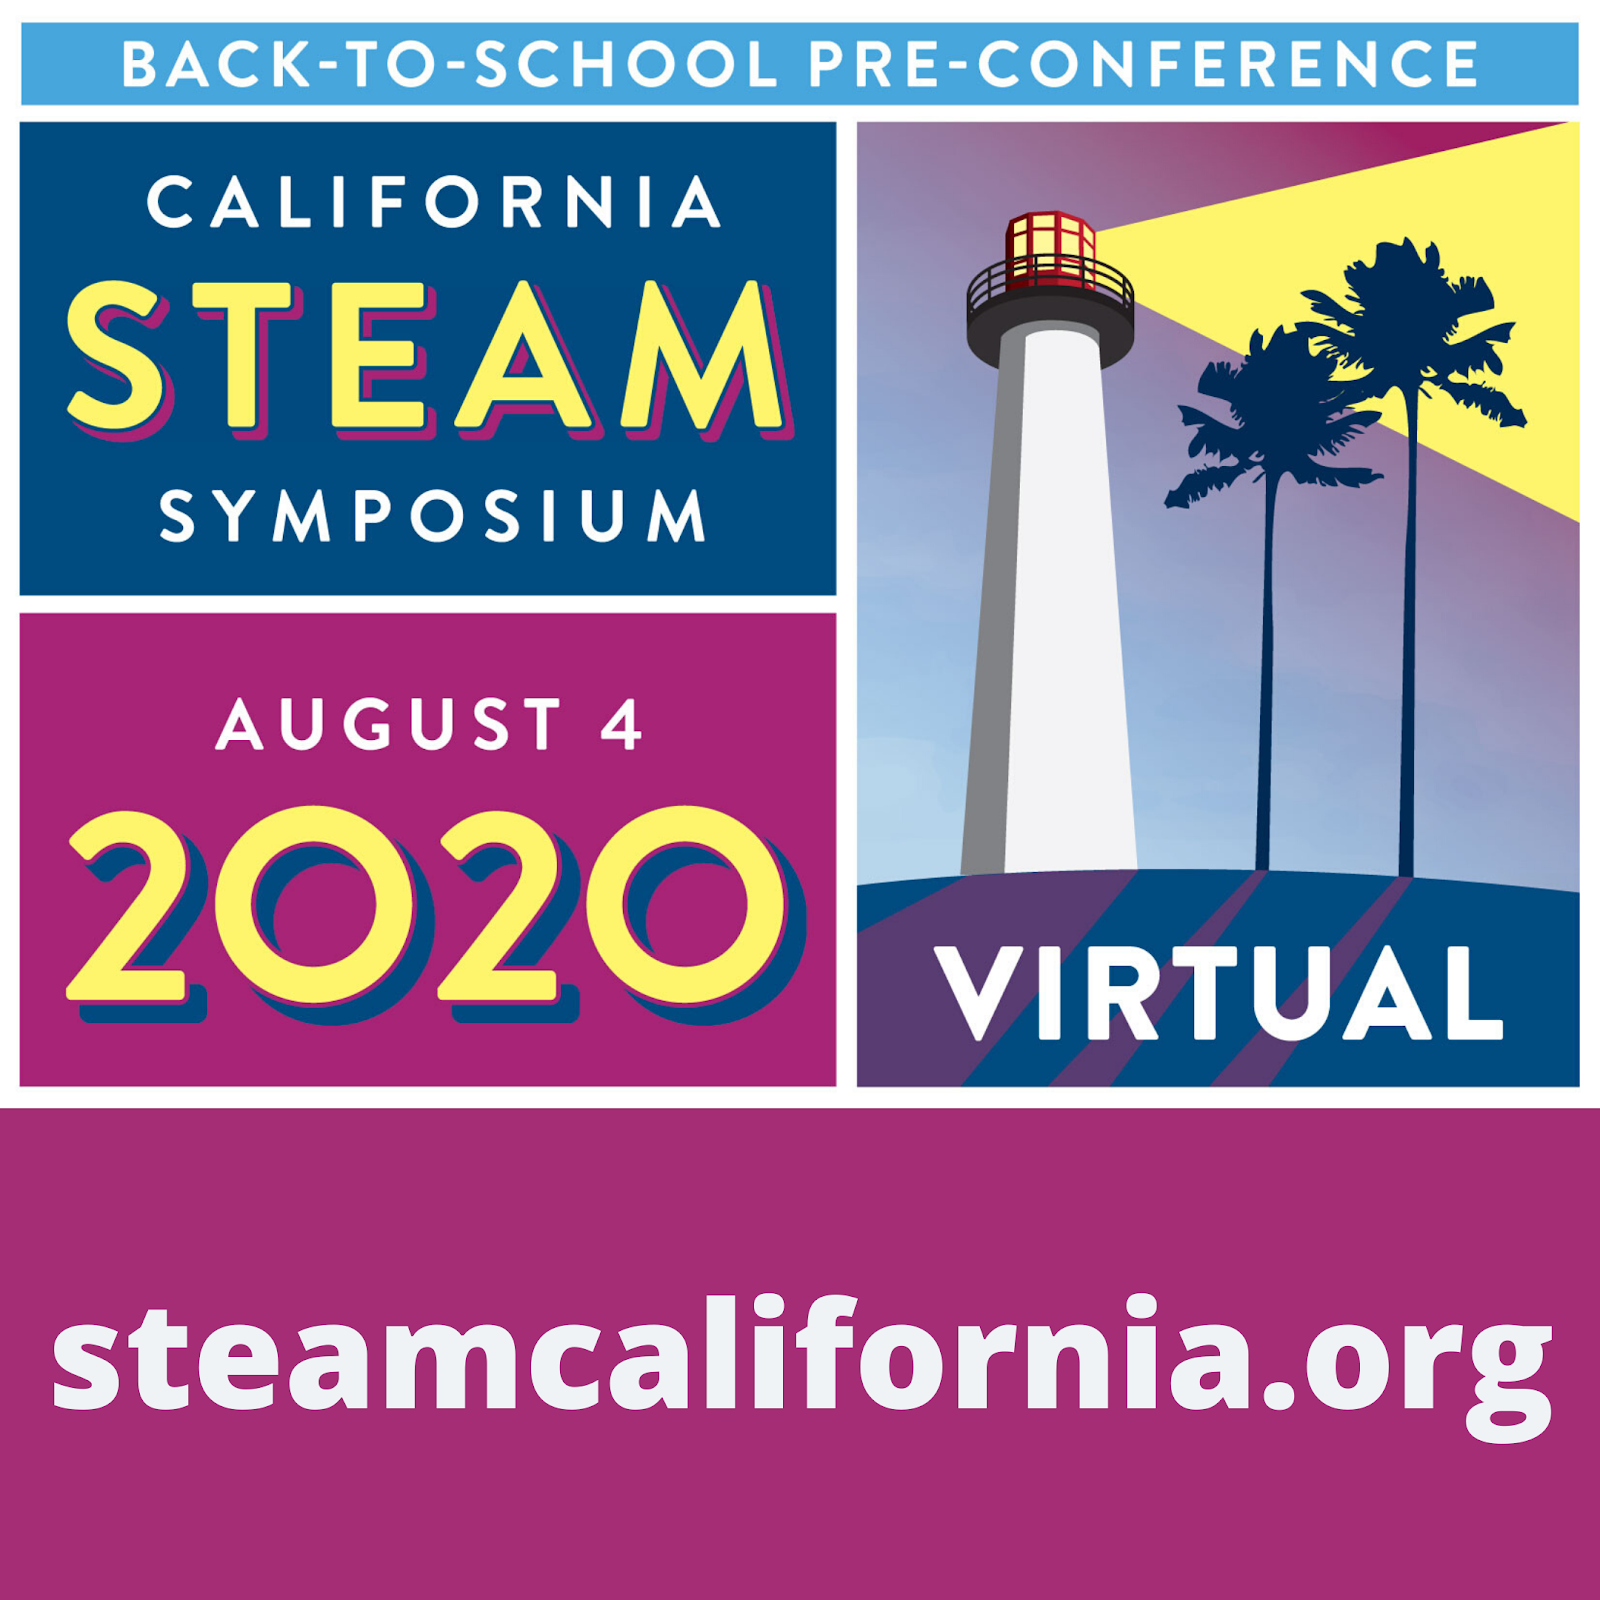 #CASTEAM20 Back-To-School Pre-Conference on August 4! 